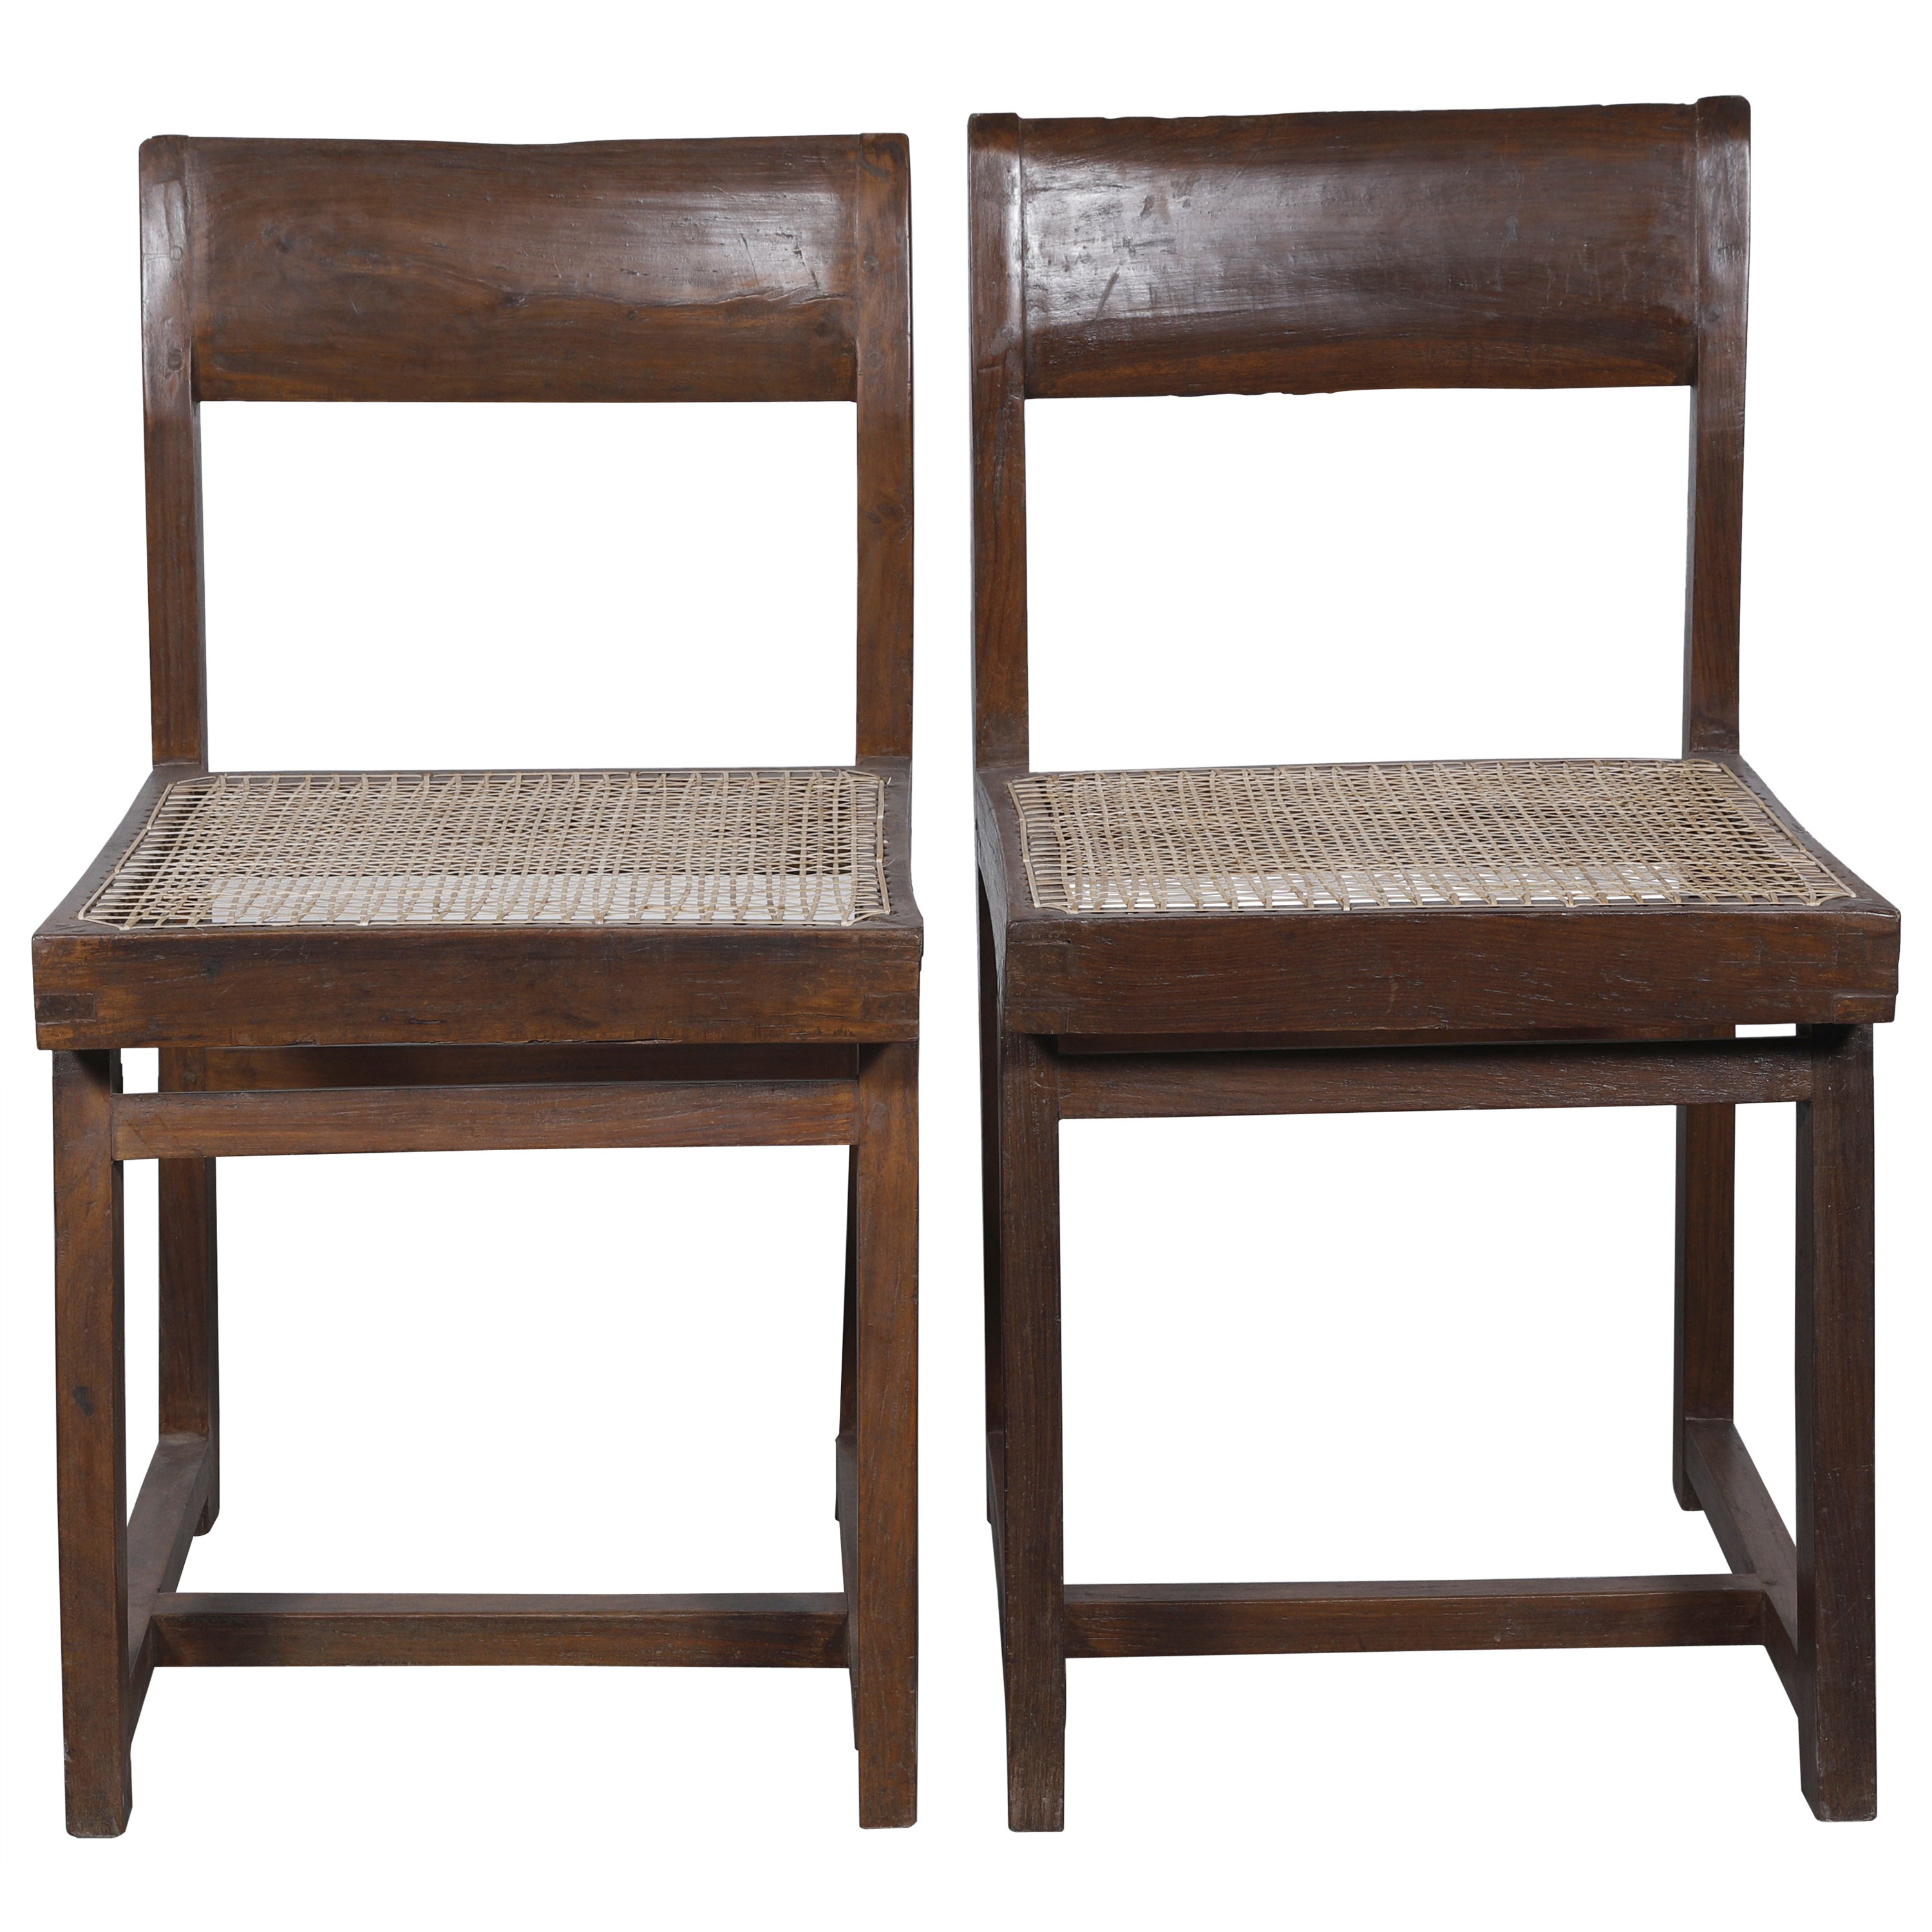 Pierre Jeanneret 2 Box Chairs with Letters from Chandigarh Authentic Mid-Century